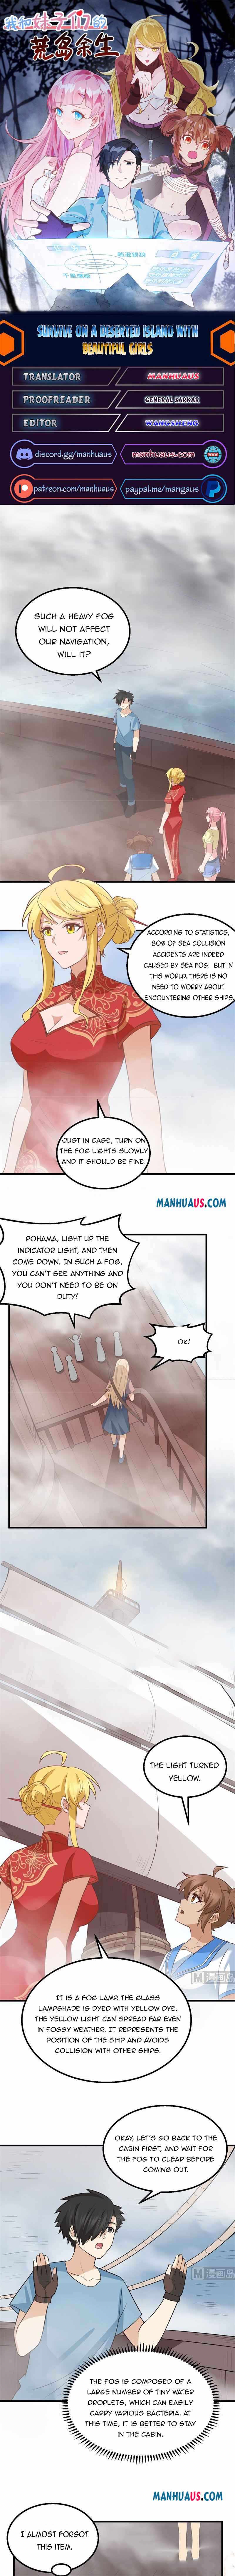 Survive On A Deserted Island With Beautiful Girls - Page 1